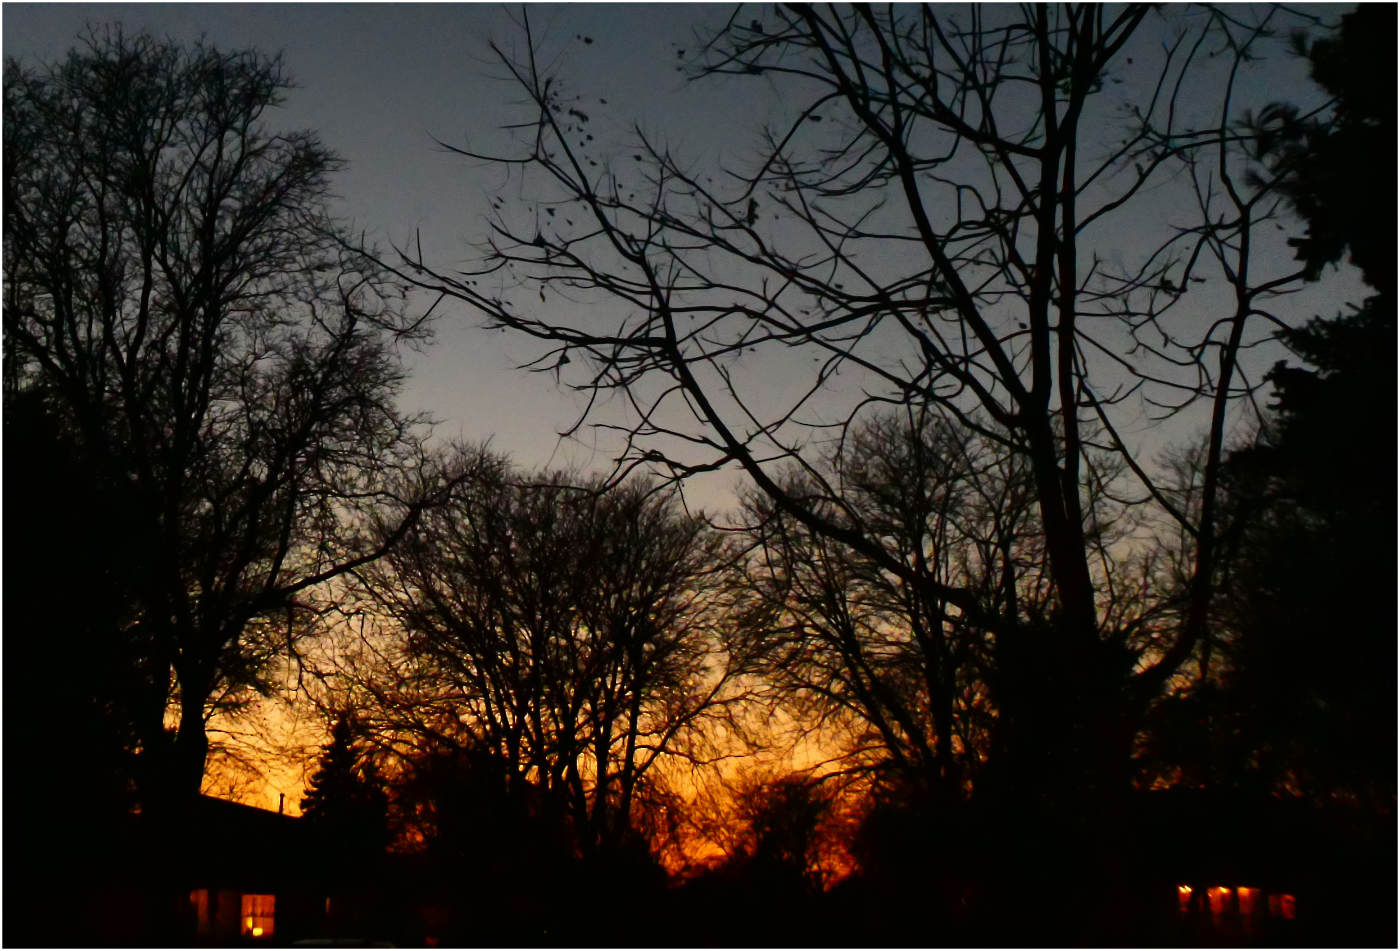 deep orange colors and gray sky at sunset with silhouettes of trees